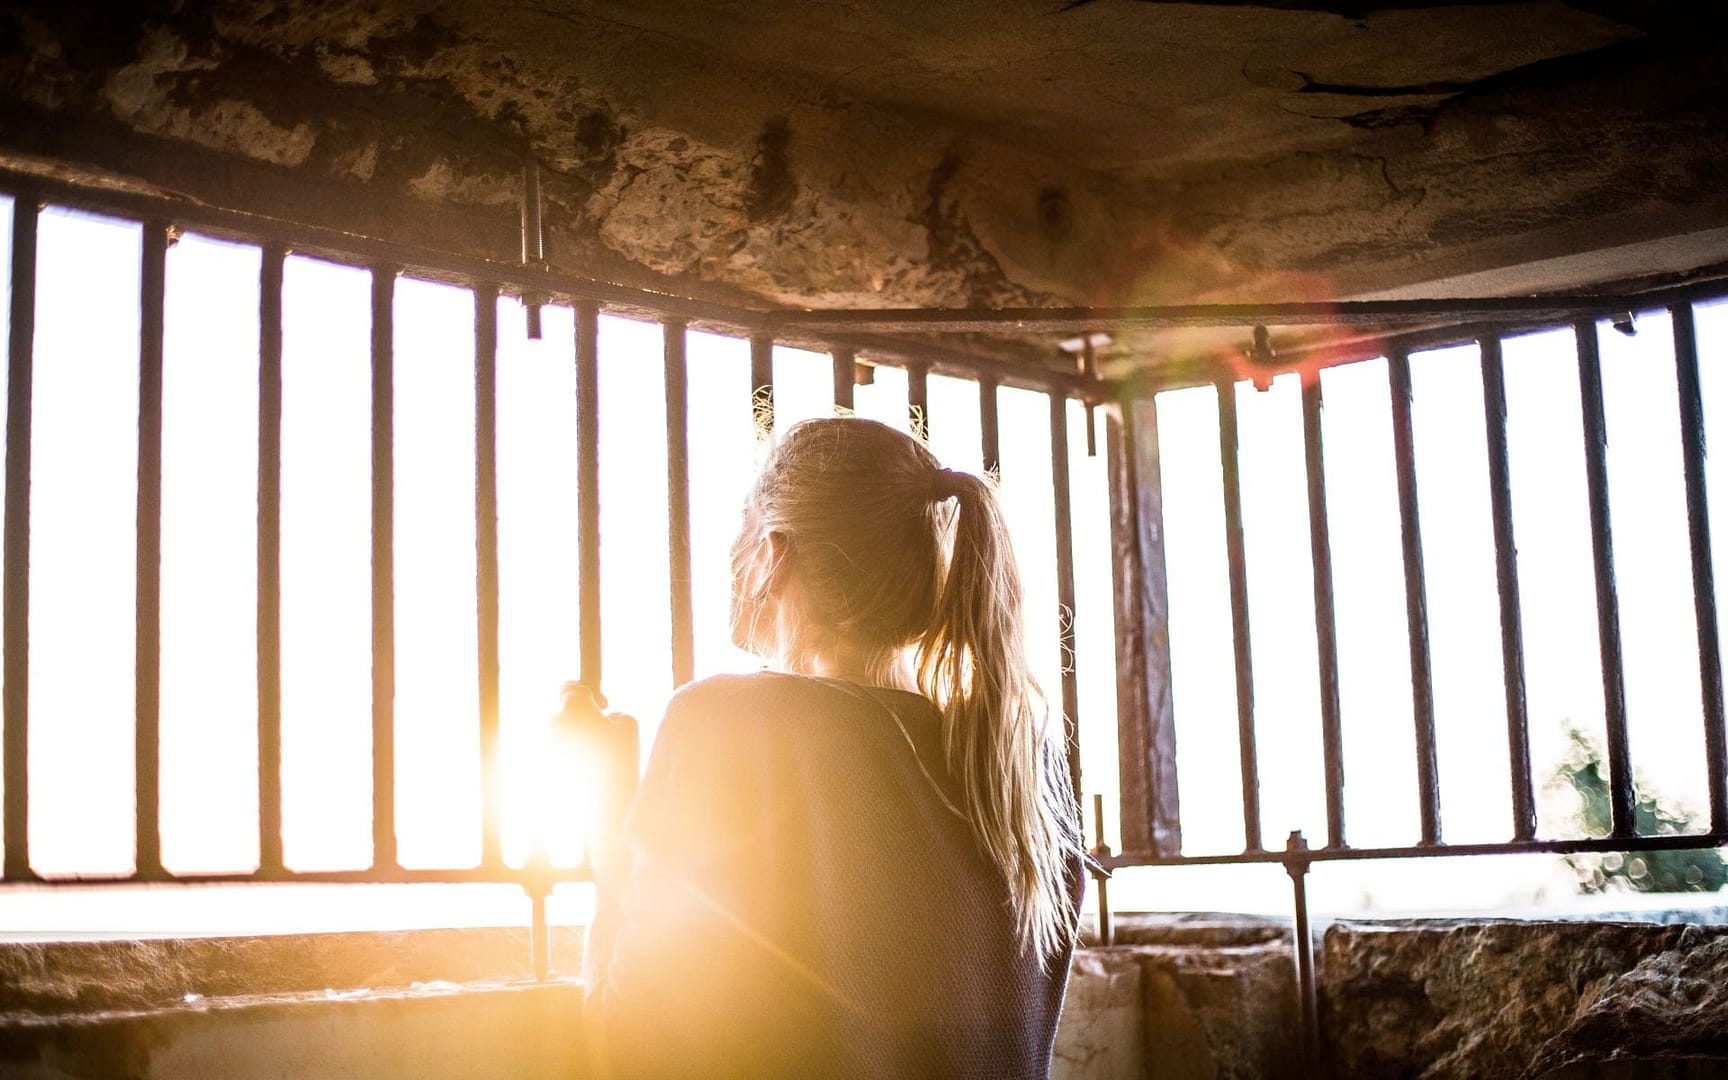 A young woman in a cell clutches bars and peers towards the sunrise